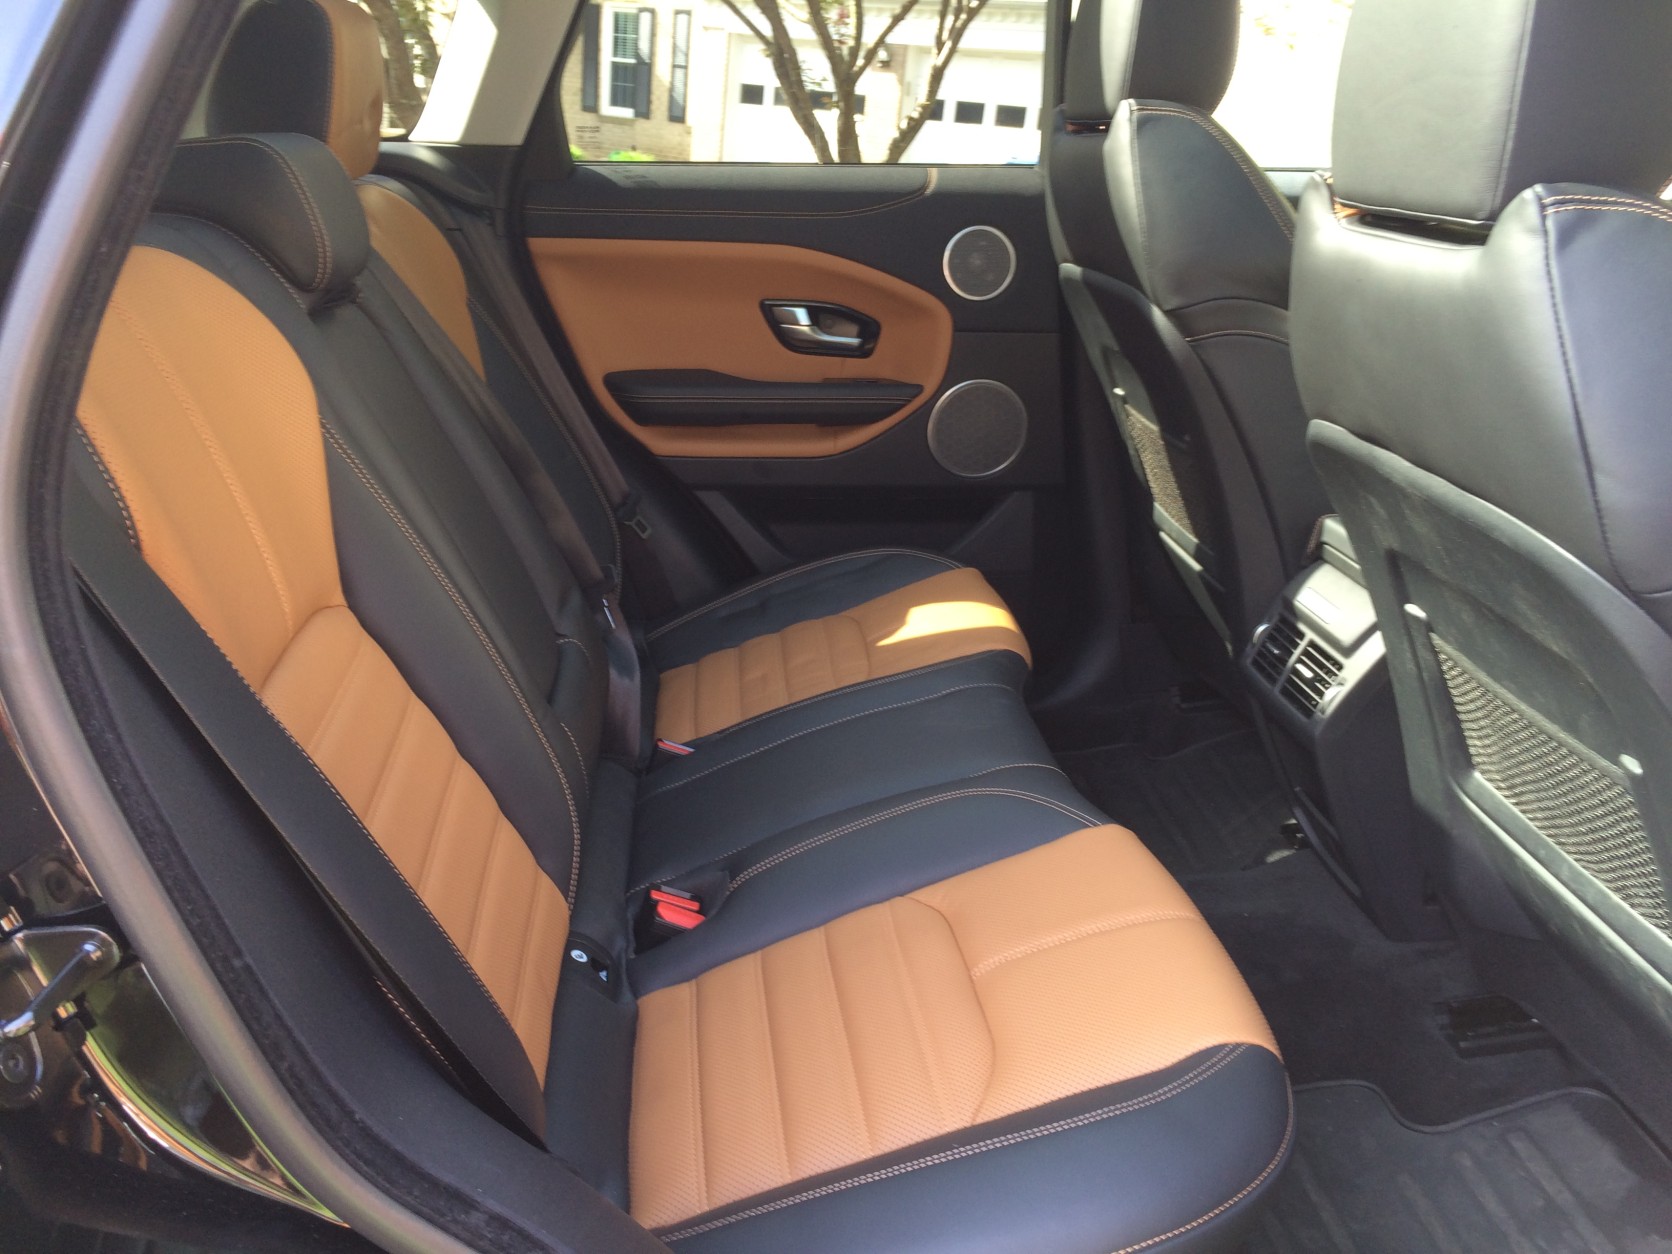 The Oxford leather seats seem to be higher quality leather than in the previous Evoque. (WTOP/Mike Parris)